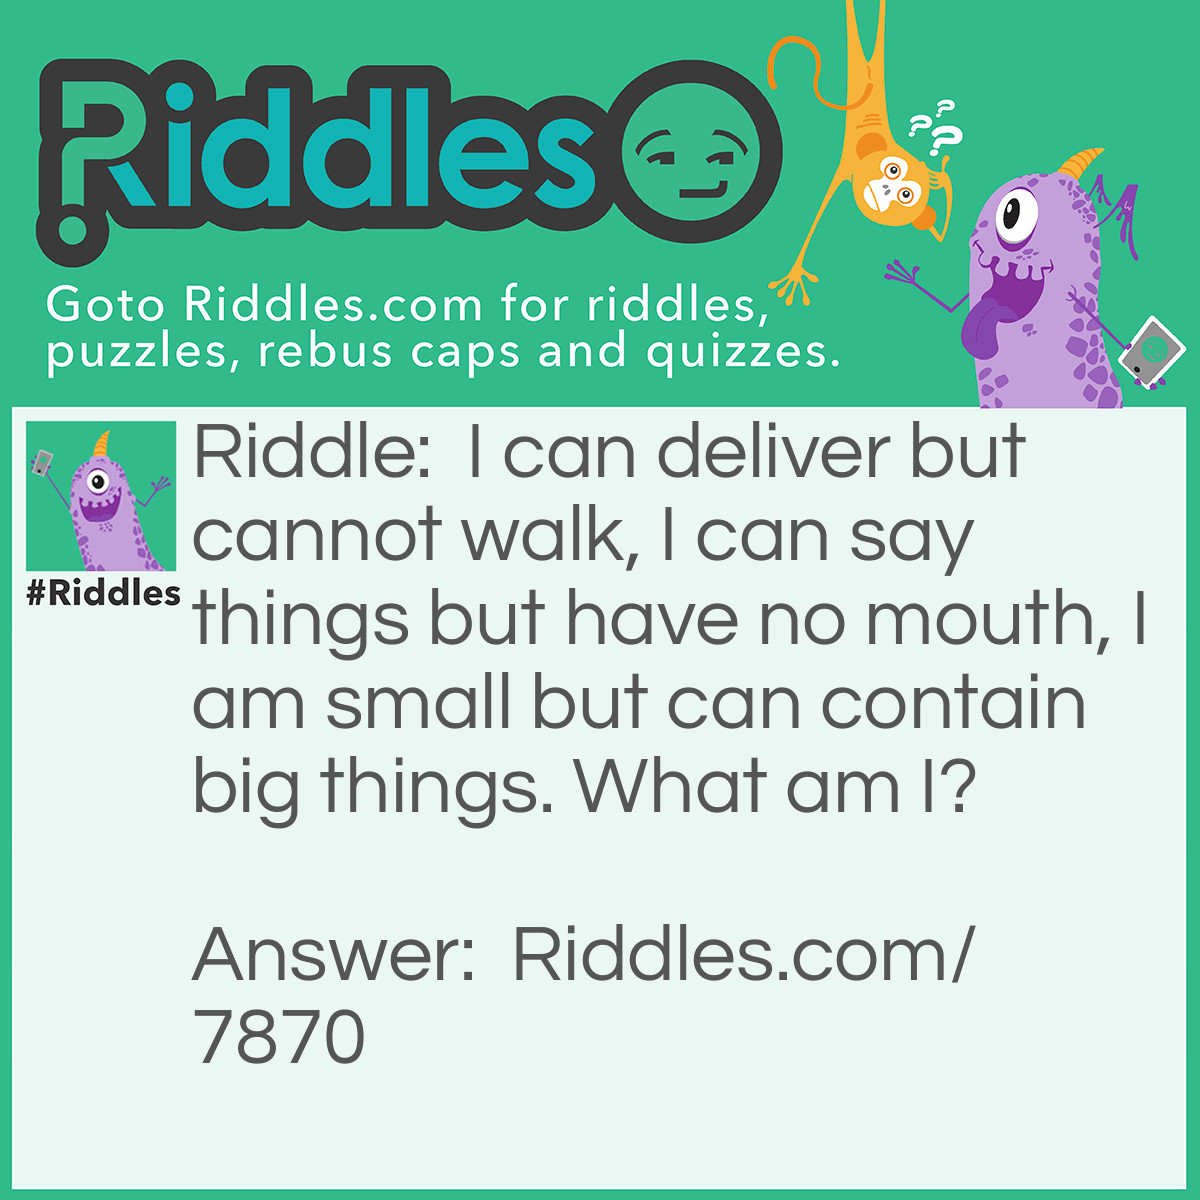 Riddle: I can deliver but cannot walk, I can say things but have no mouth, I am small but can contain big things. What am I? Answer: An Envelope.